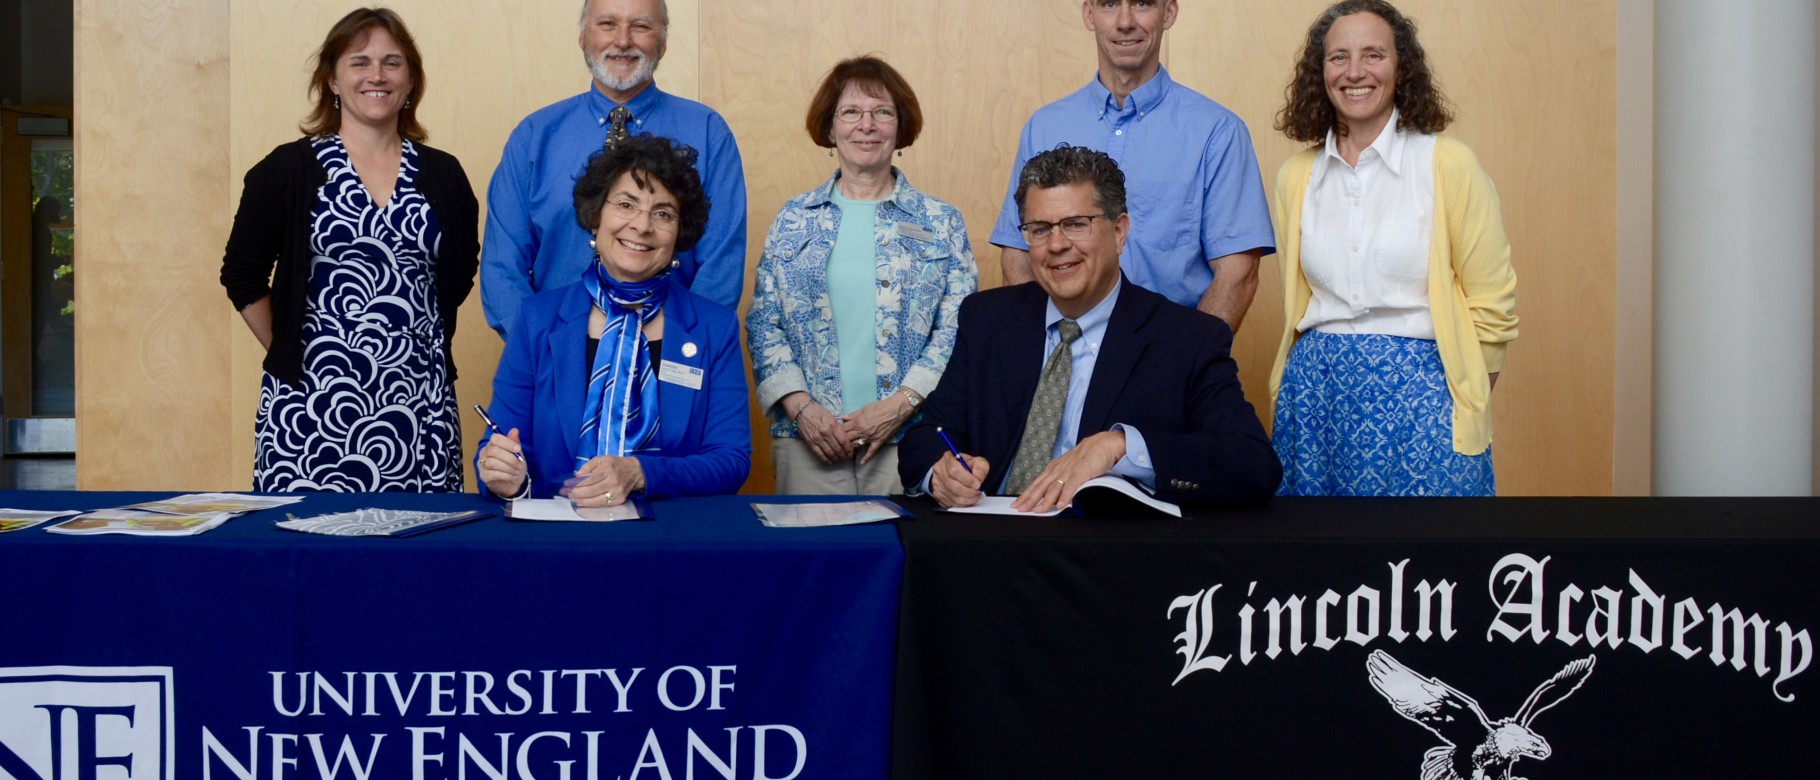 L-R seated: Jeanne Hey, Ph.D., dean of UNE’s College of Arts and Sciences; David Sturdevant, head of school, Lincoln Academy; L-